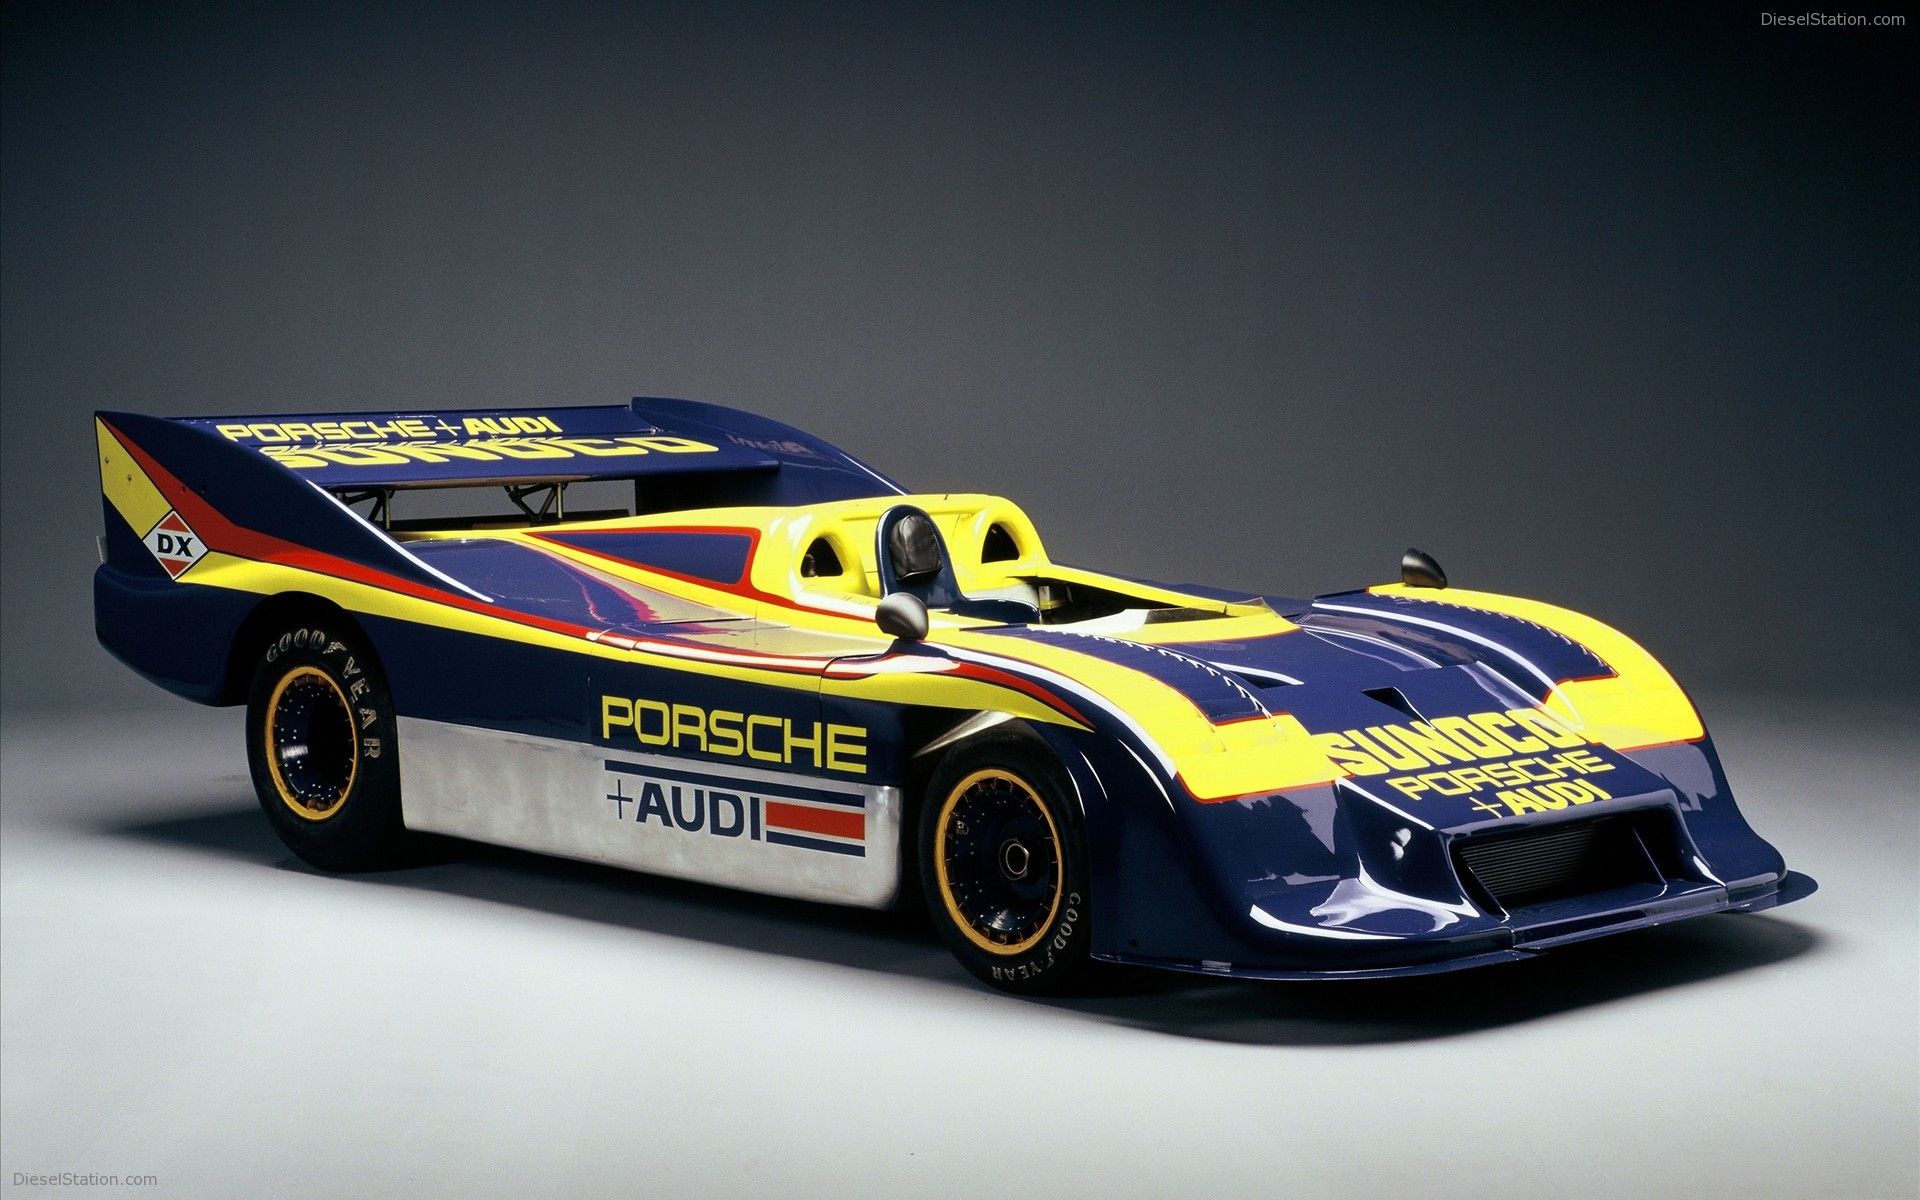 1920x1200 Porsche 917 Greatest Racing Car In History Widescreen Exotic Car Wallpaper Of 22 Diesel Station